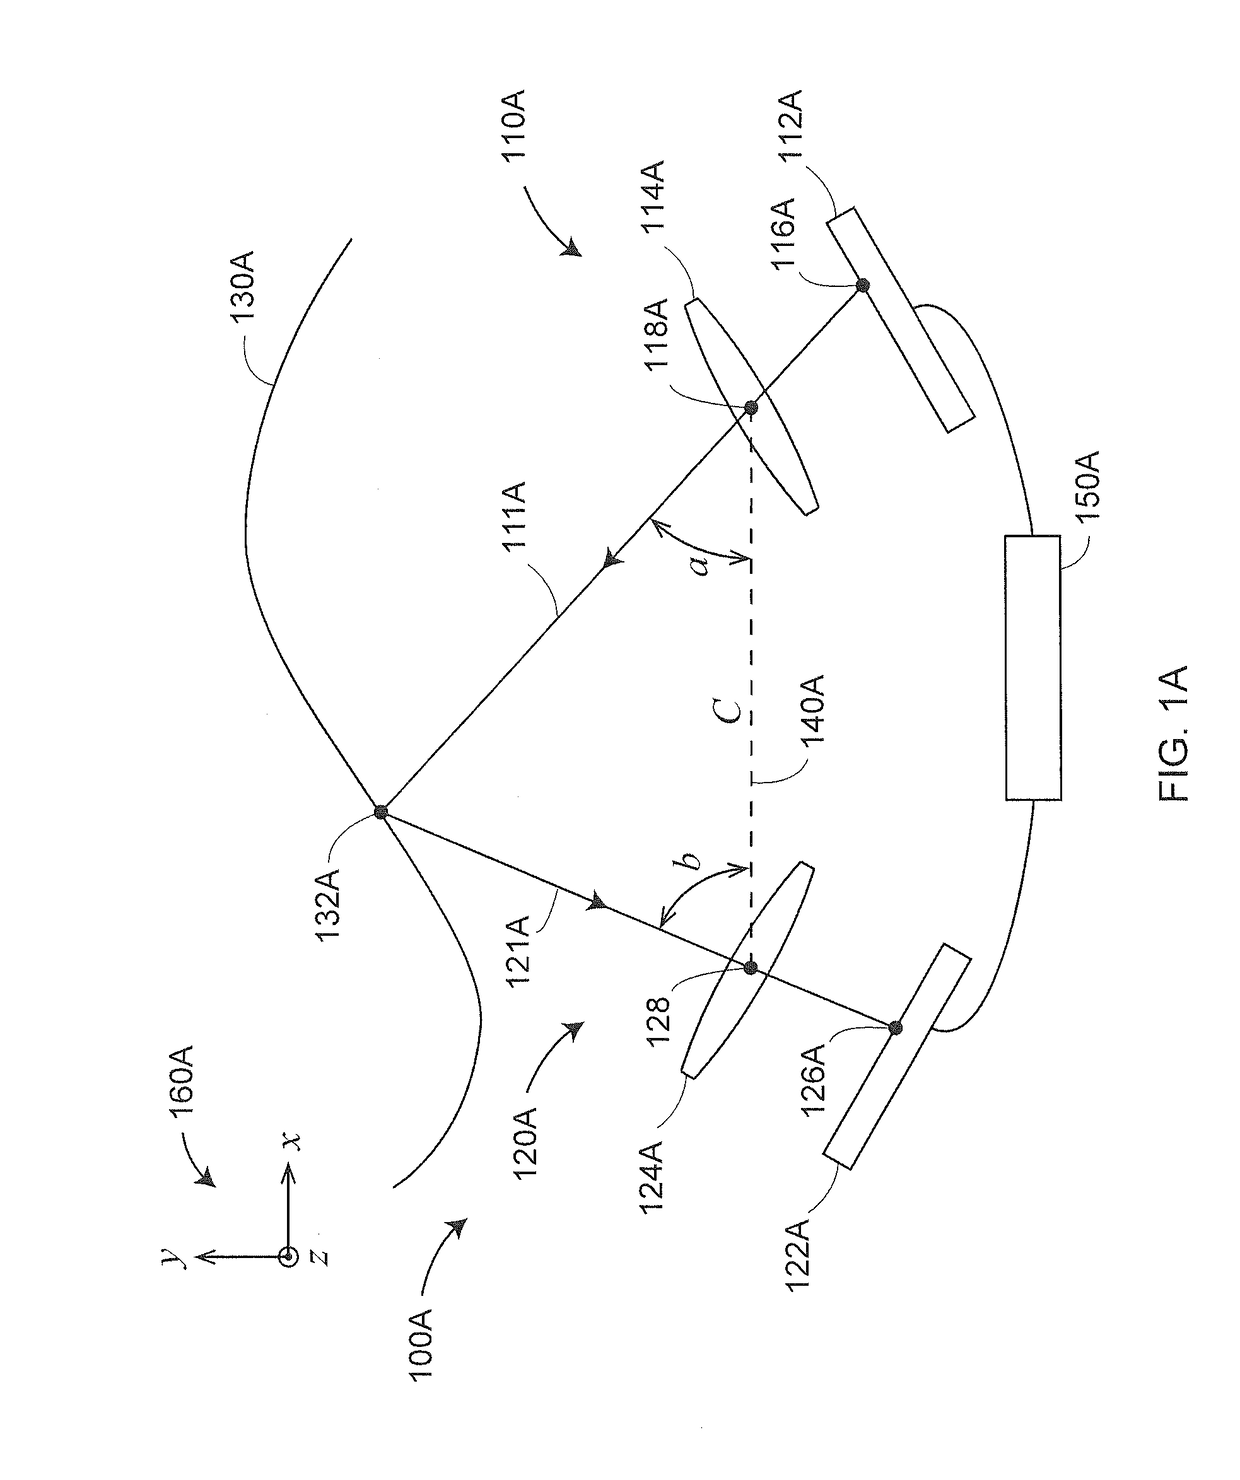 Aerial device that cooperates with an external projector to measure three-dimensional coordinates